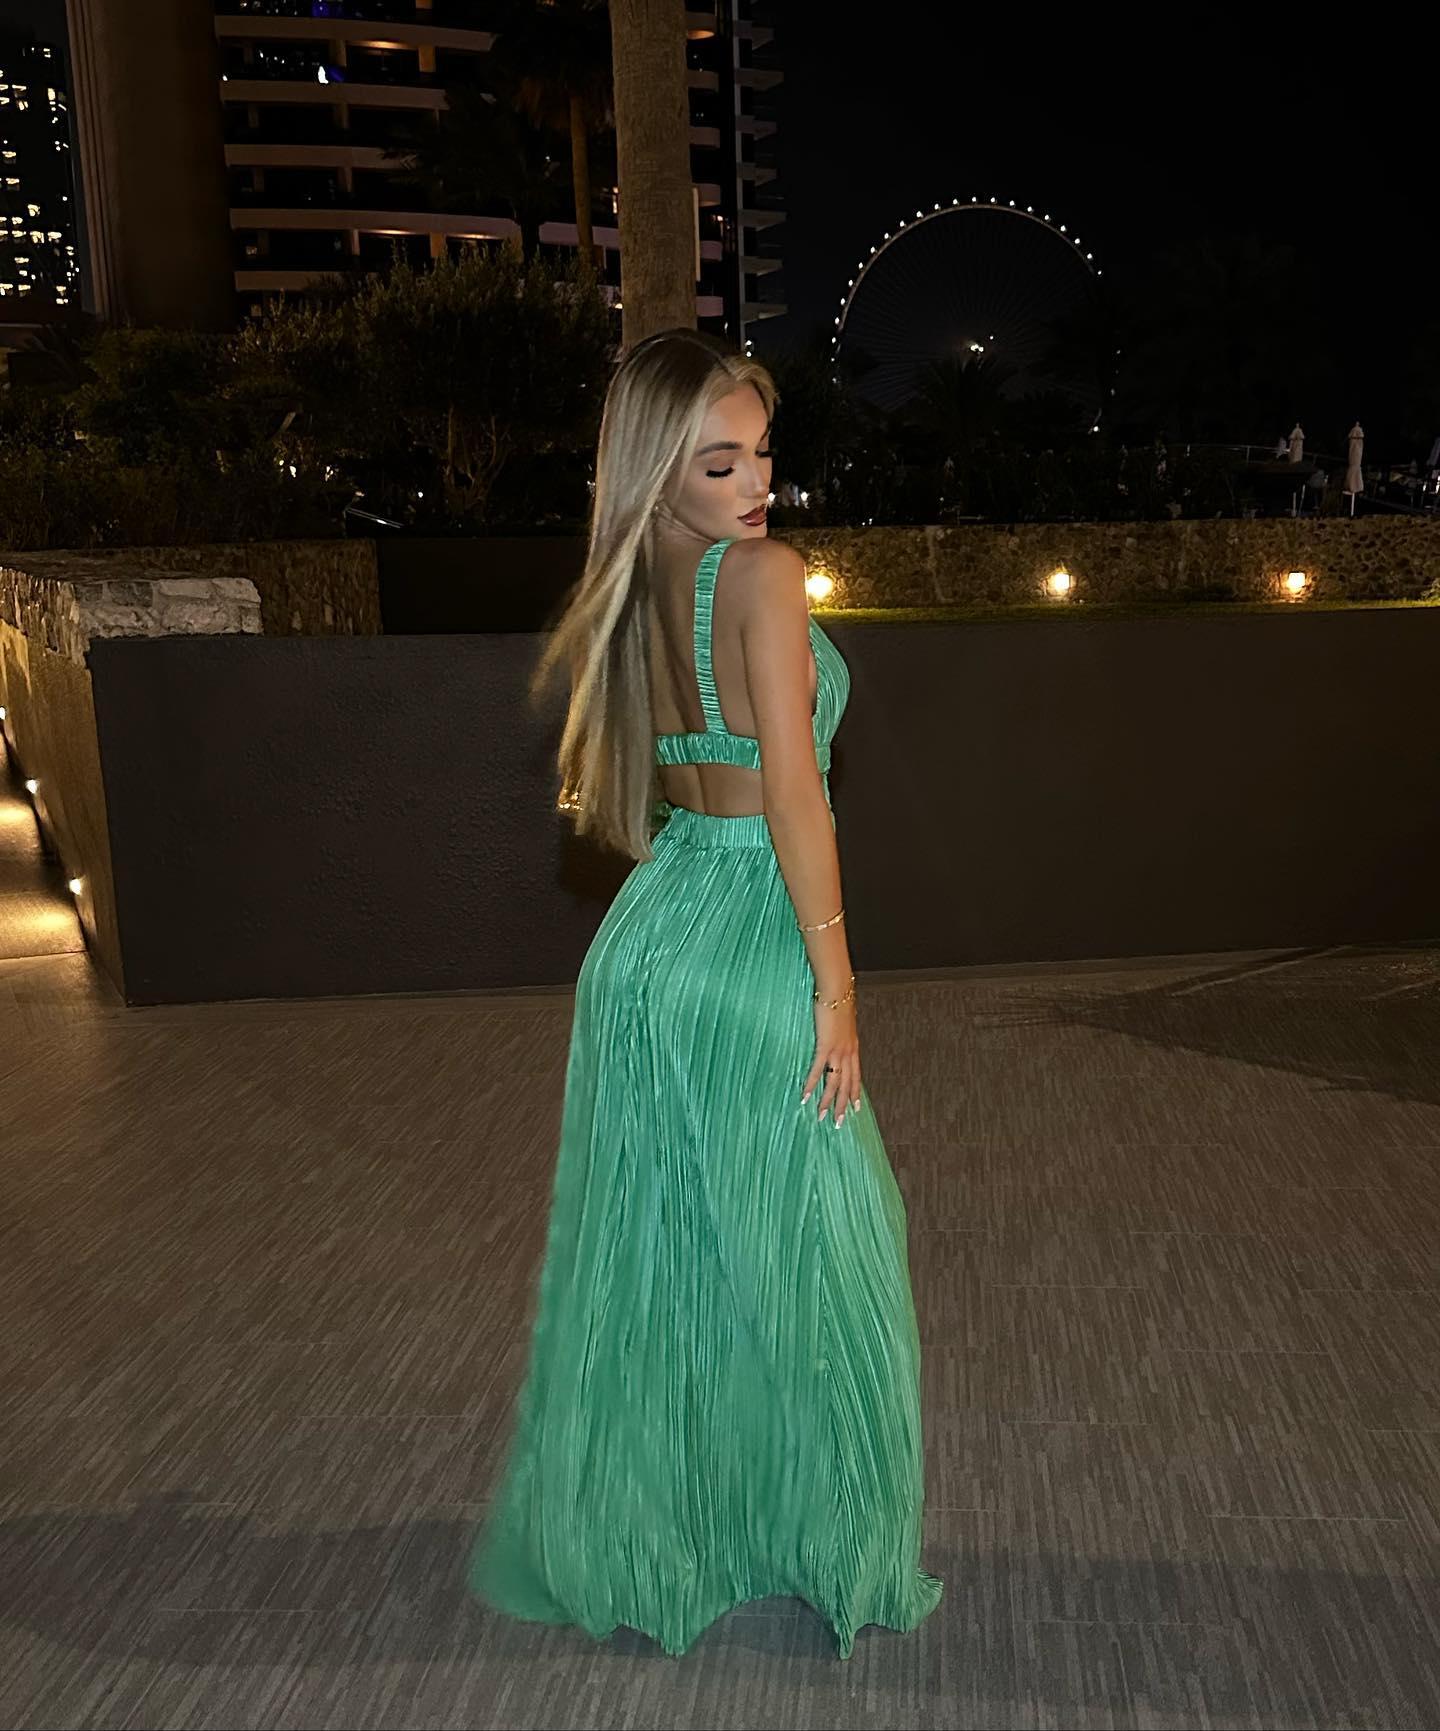 Beaux Raymond poses in a green gown